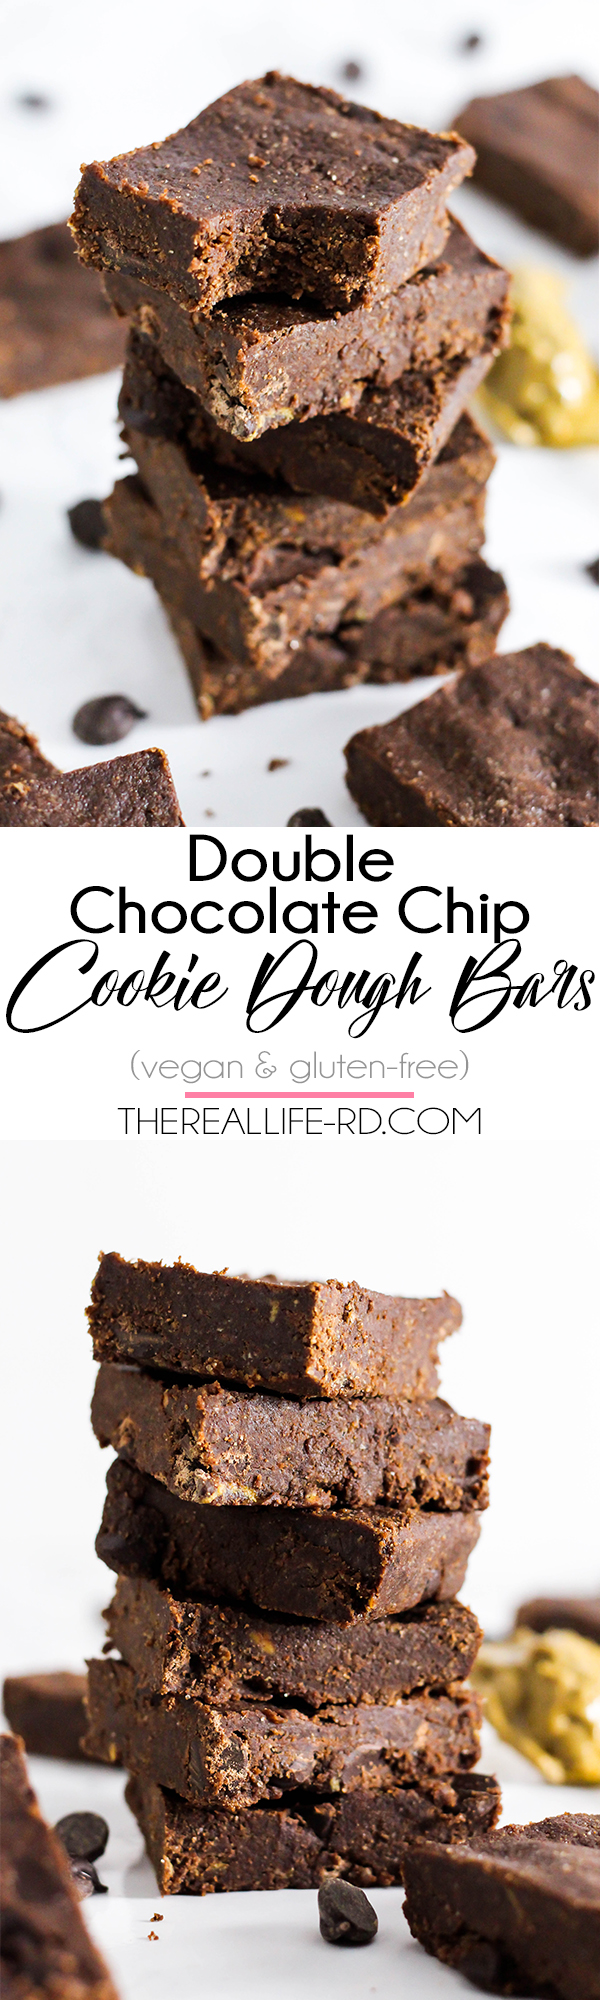 Fudgy, sweet Double Chocolate Chip Cookie Dough Bars that are the perfect nighttime treat! | The Real Life RD